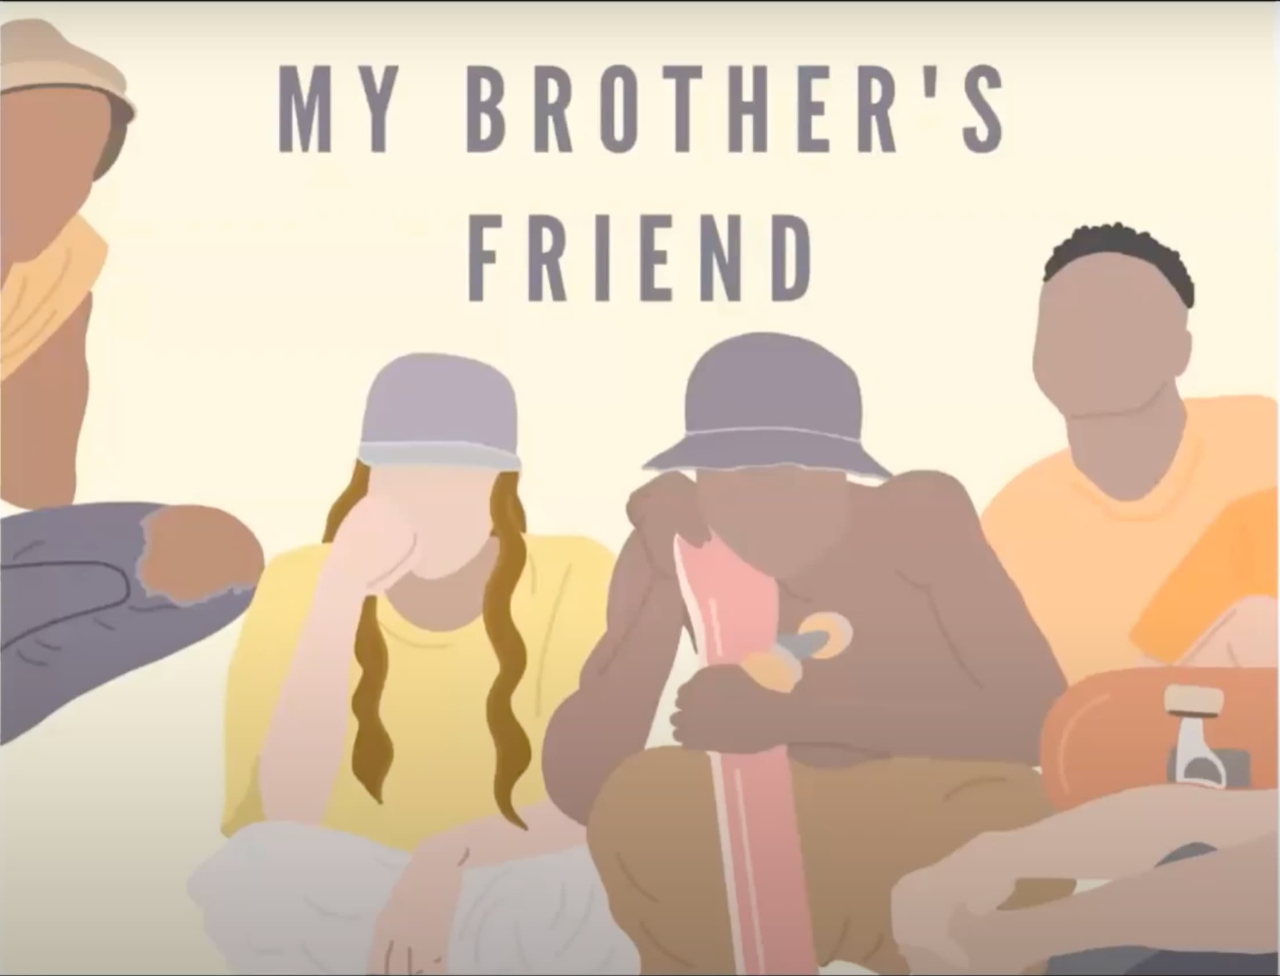 Graphic of four young people in hats and casual clothing with text "My Brother's Friend"